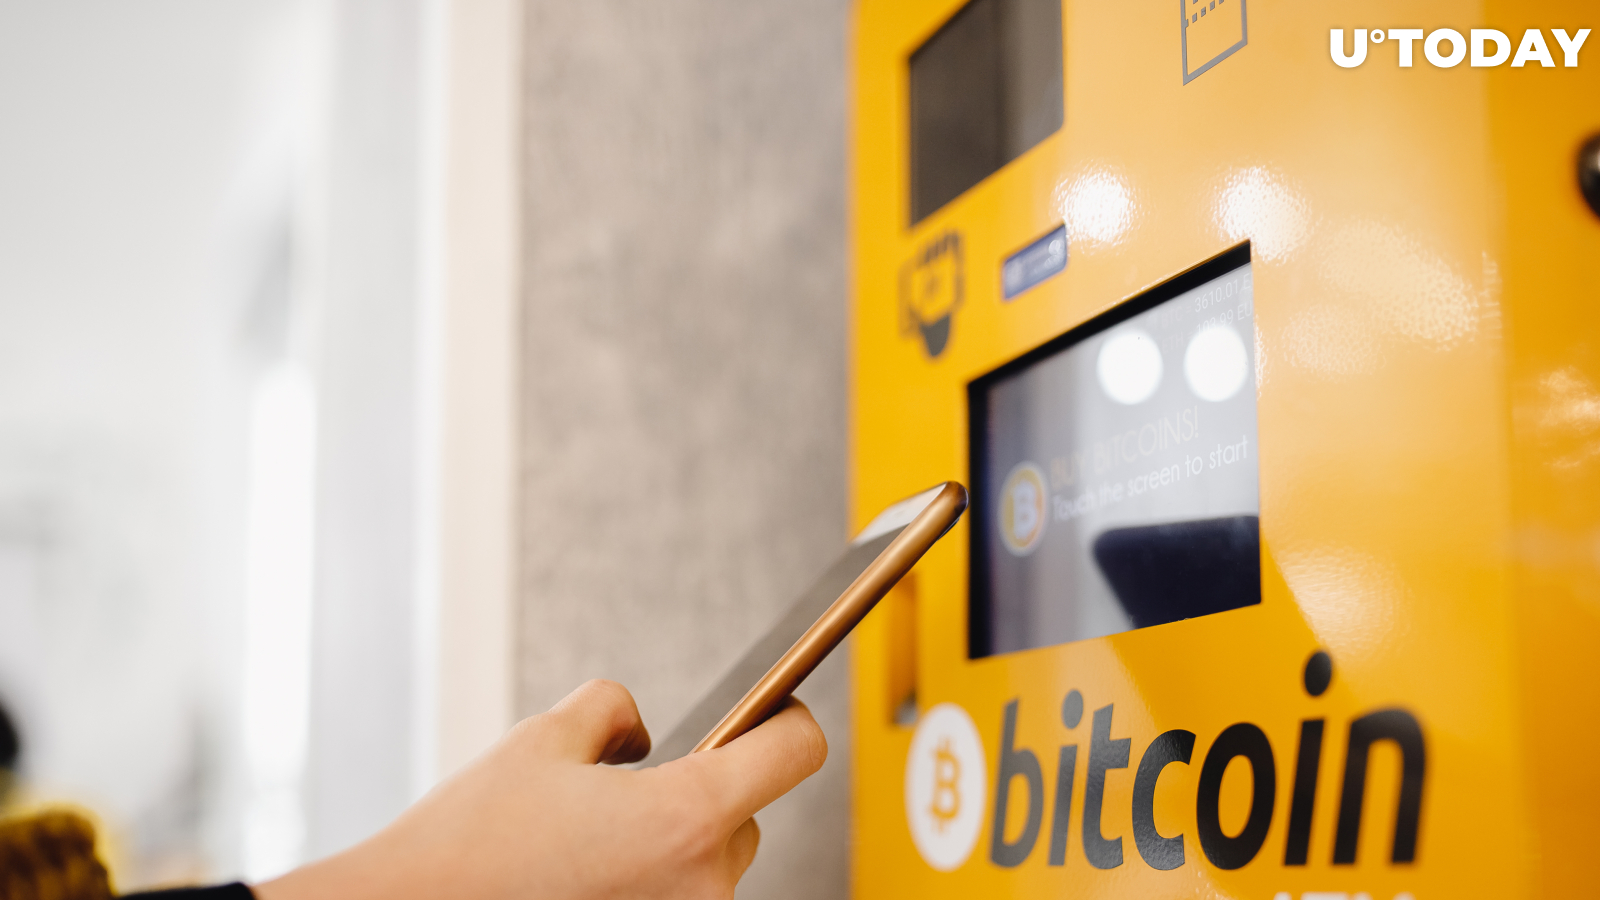 Leading Bitcoin ATM Network Now Has 1,000 Machines